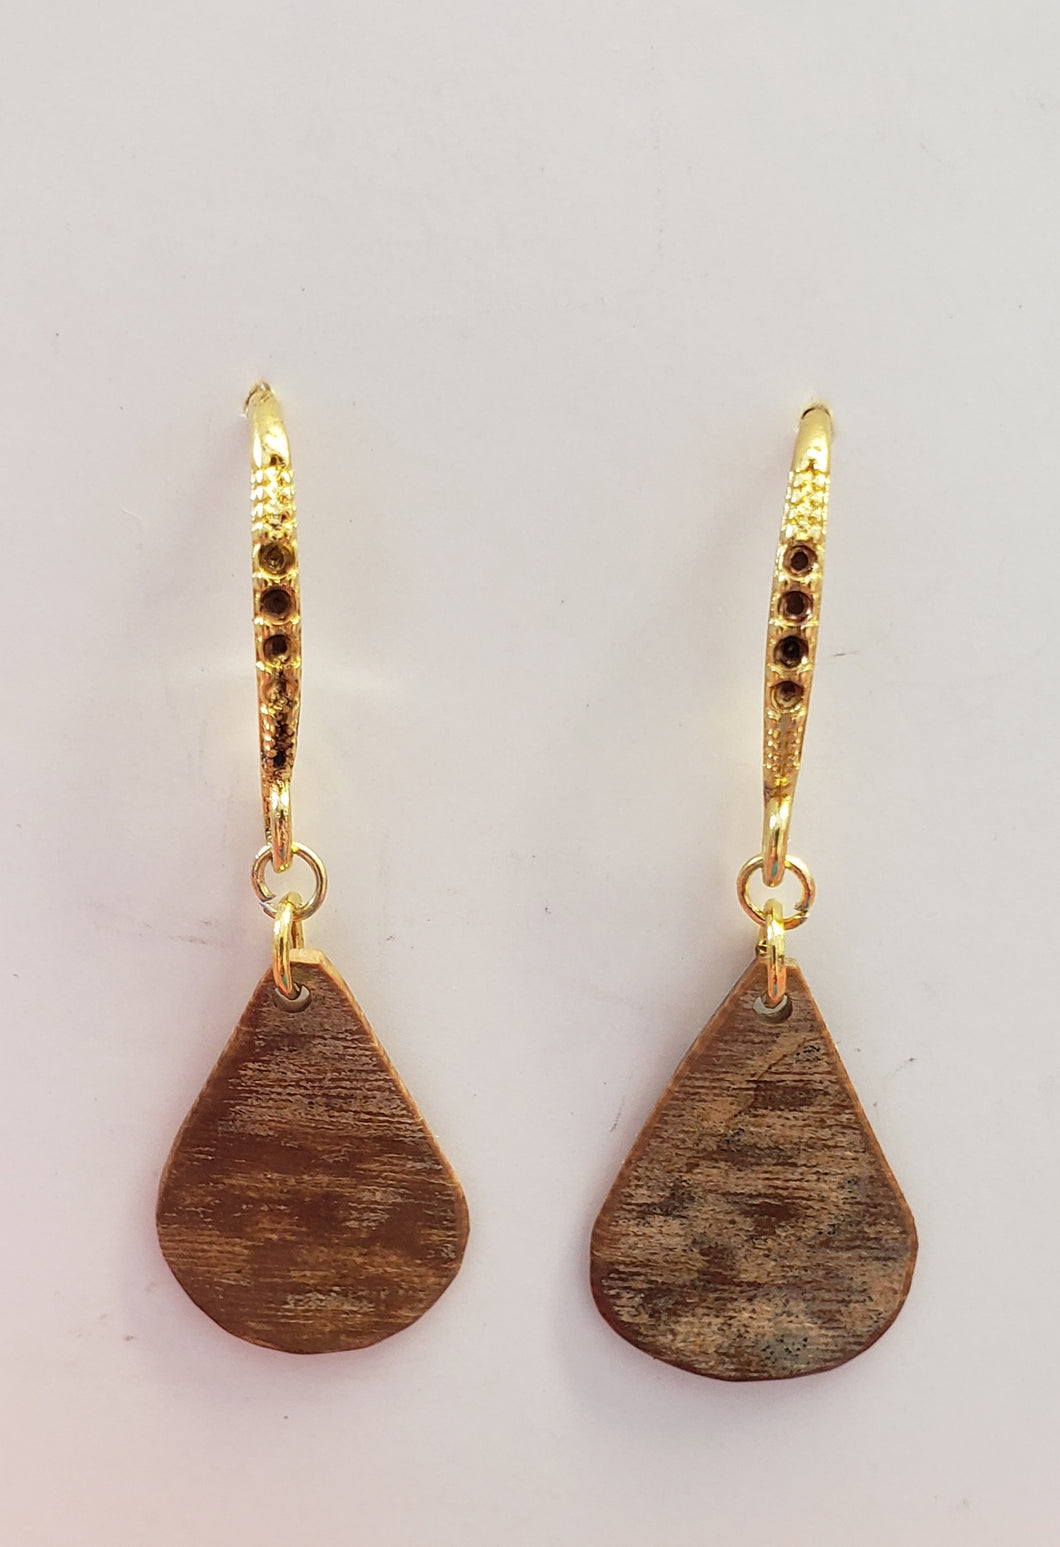 This pair of Alaskan Fossil Mammoth Ivory Earrings are about 25,000 years old and very uniquely colored. They are 1